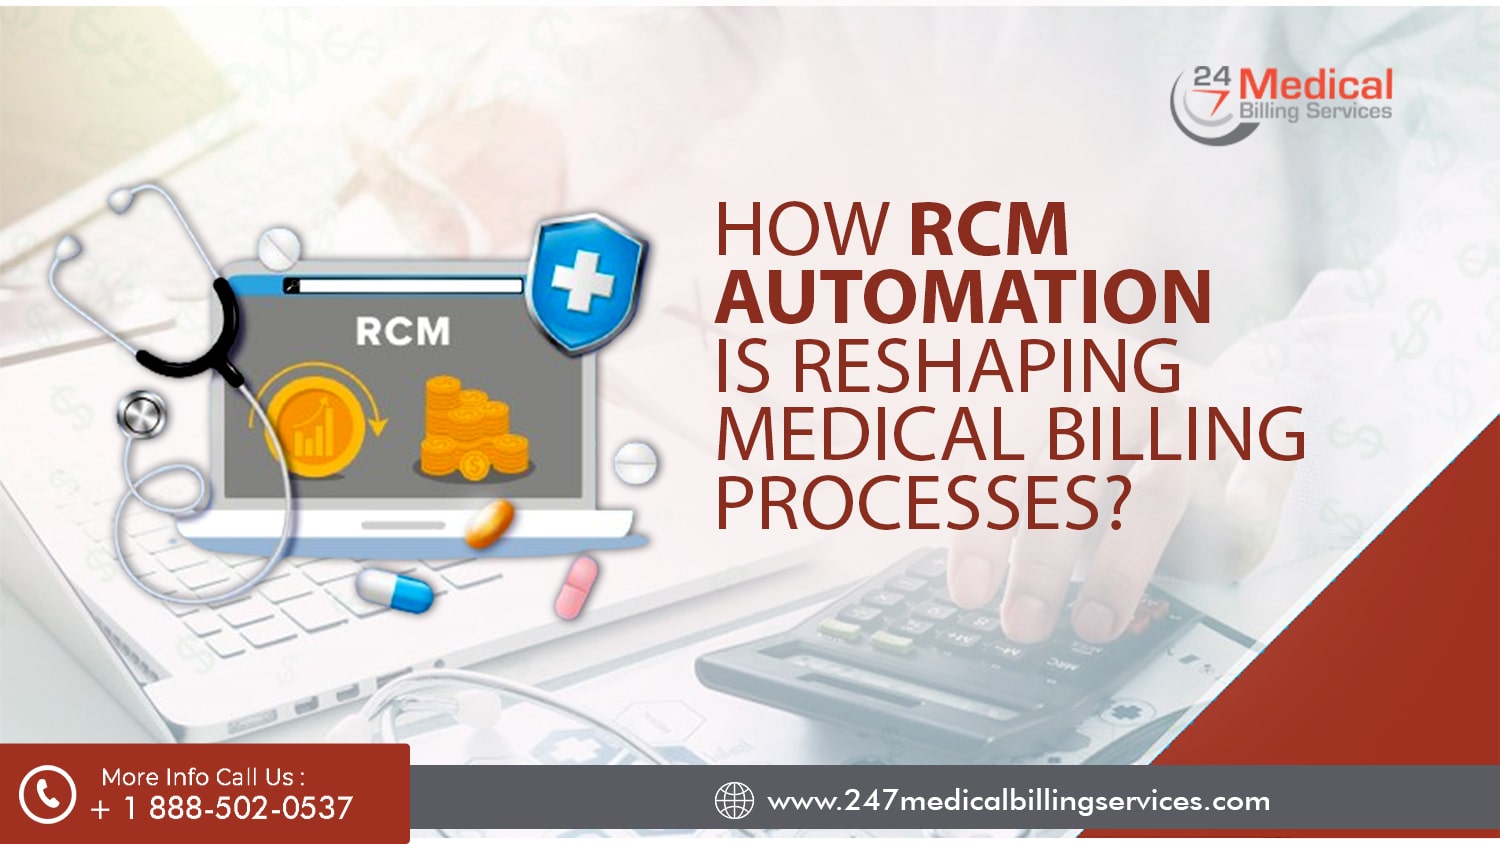  How RCM Automation is Reshaping Medical Billing Processes?